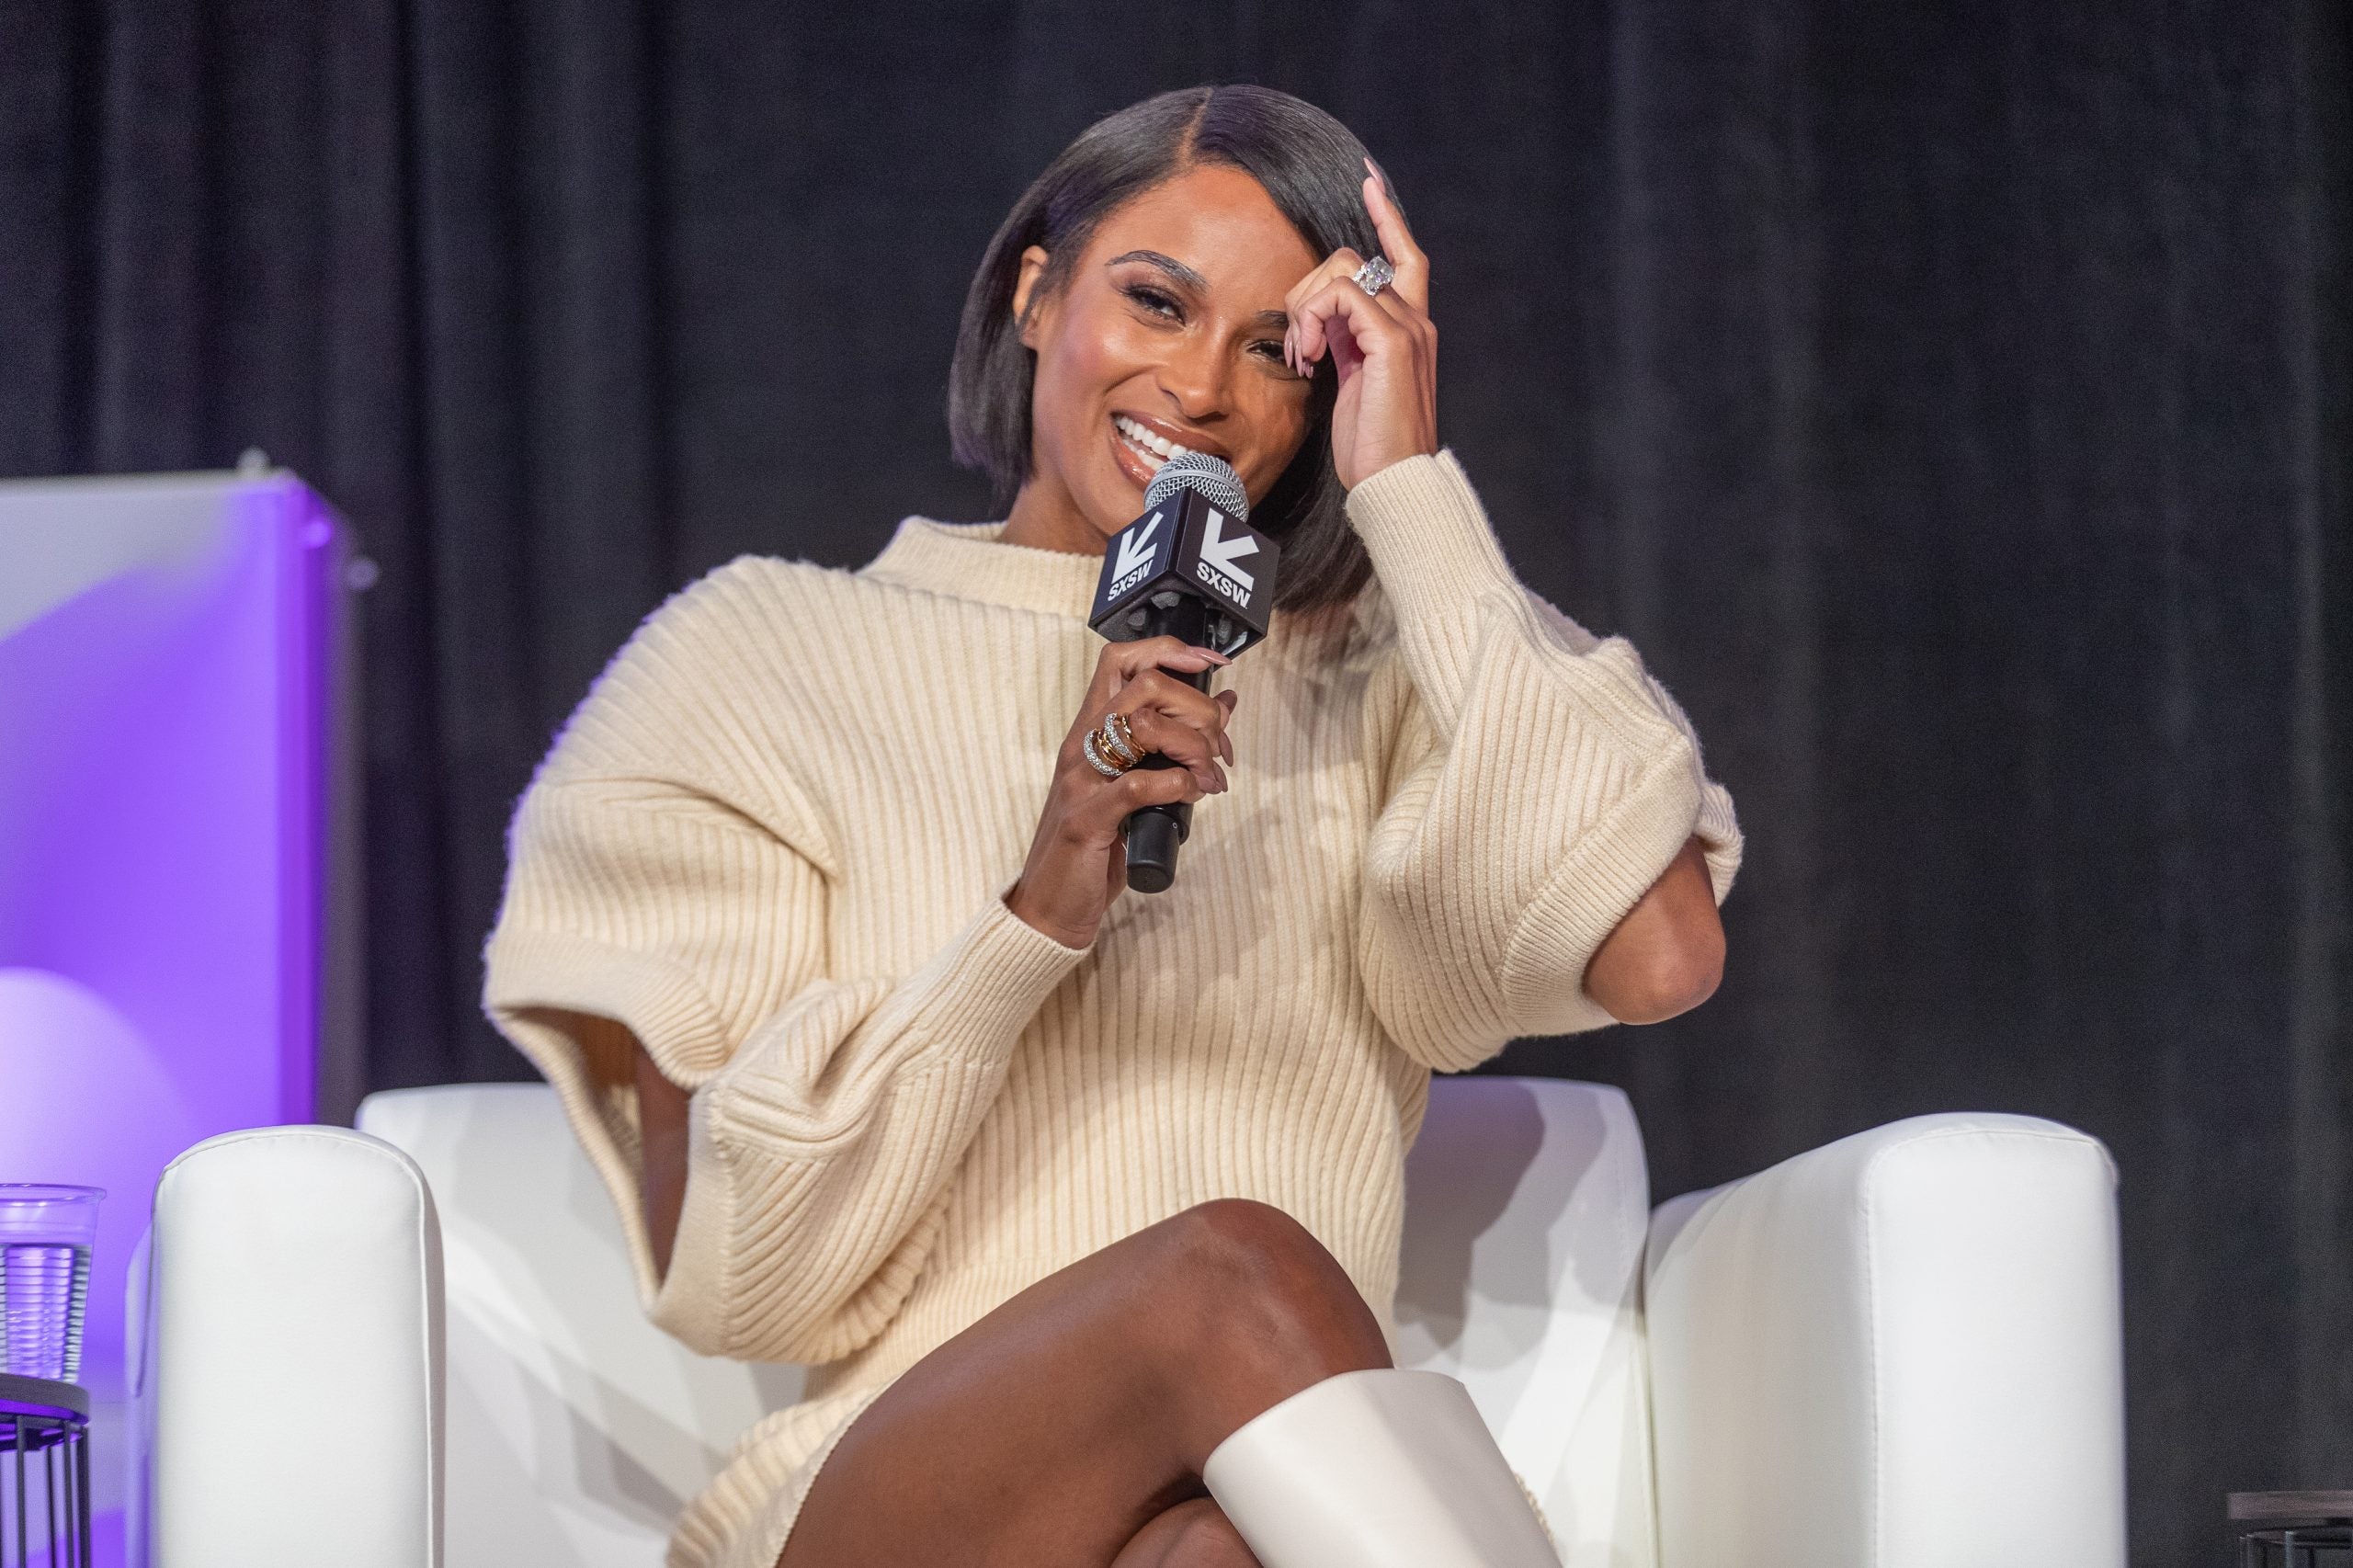 EXCLUSIVE: Ciara Responds To Backlash Over Her "Independent" Lyrics And Head-Turning Oscars Dress At SXSW